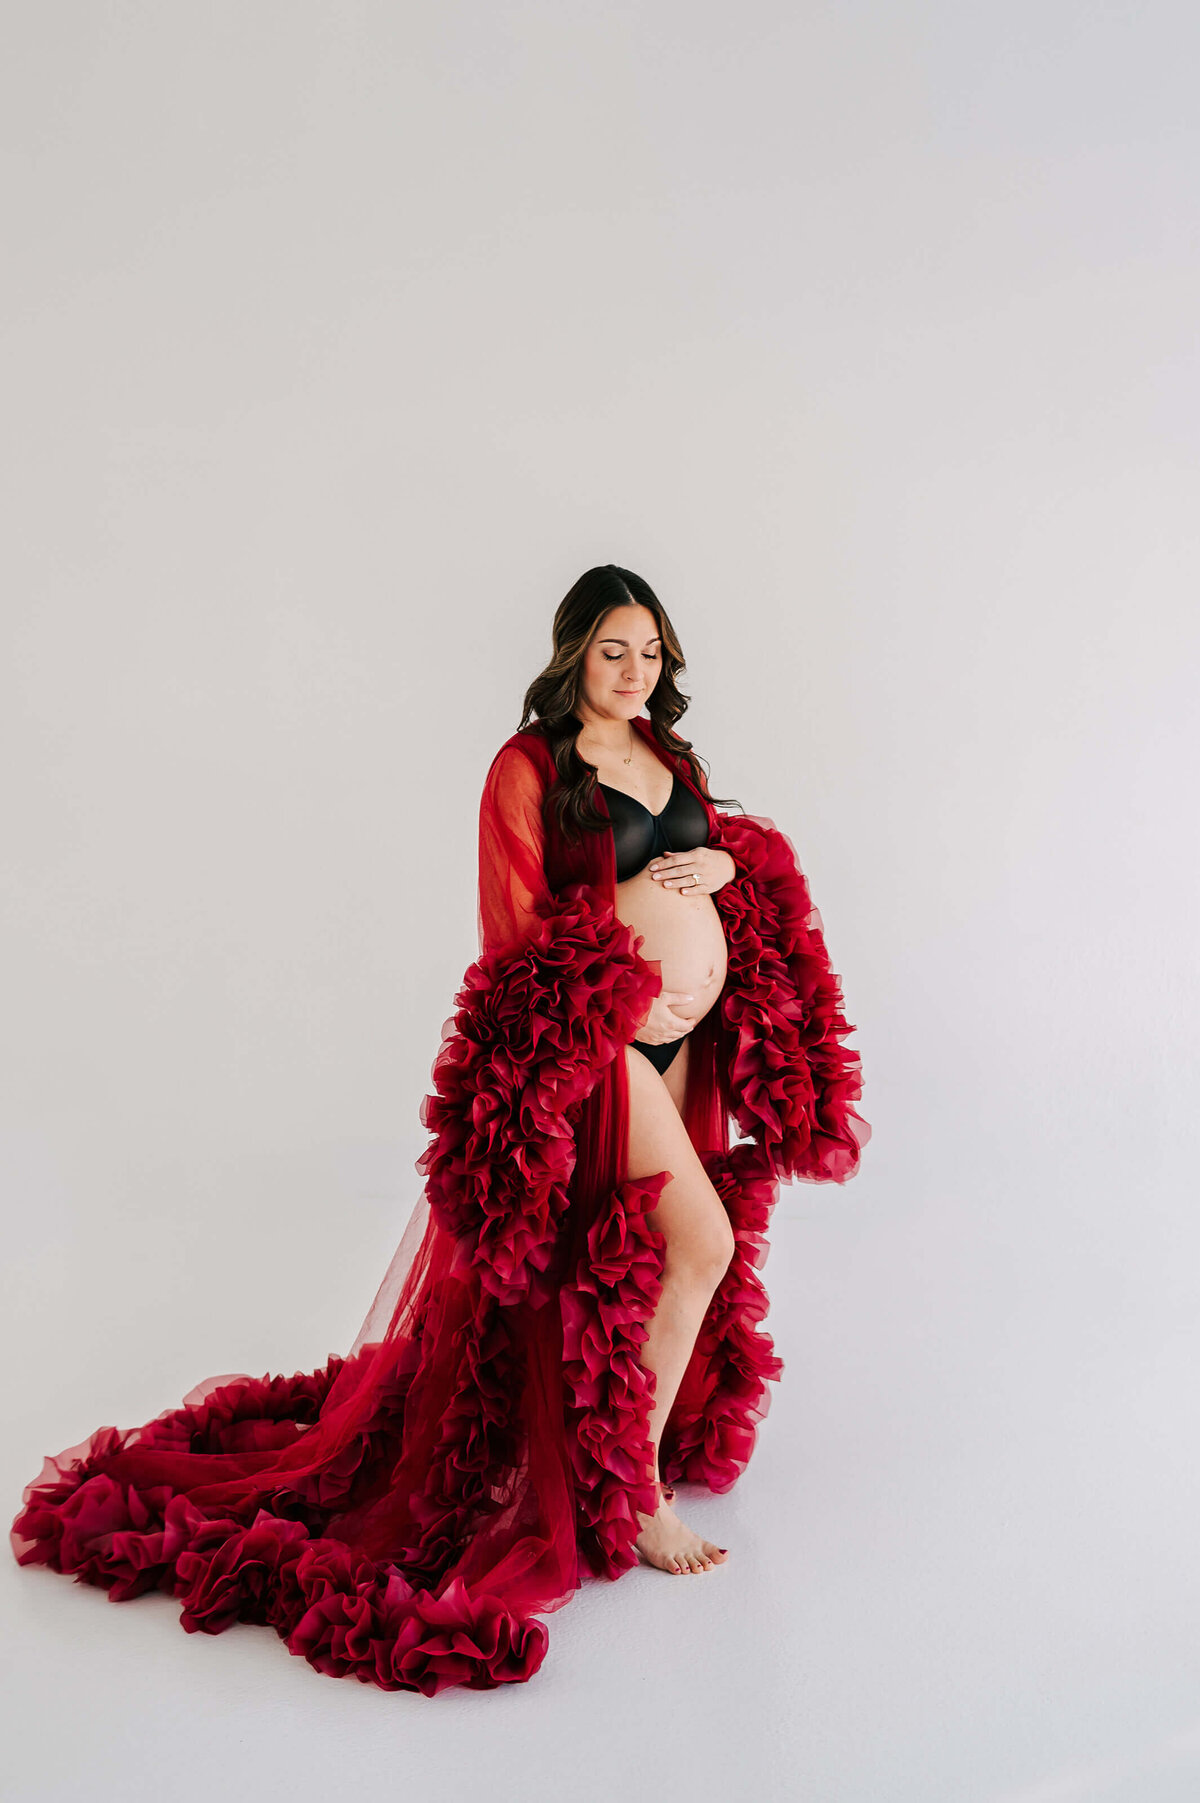 Branson maternity photographer Jessica Kennedy of The XO Photography captures pregnant mom in frilly red robe